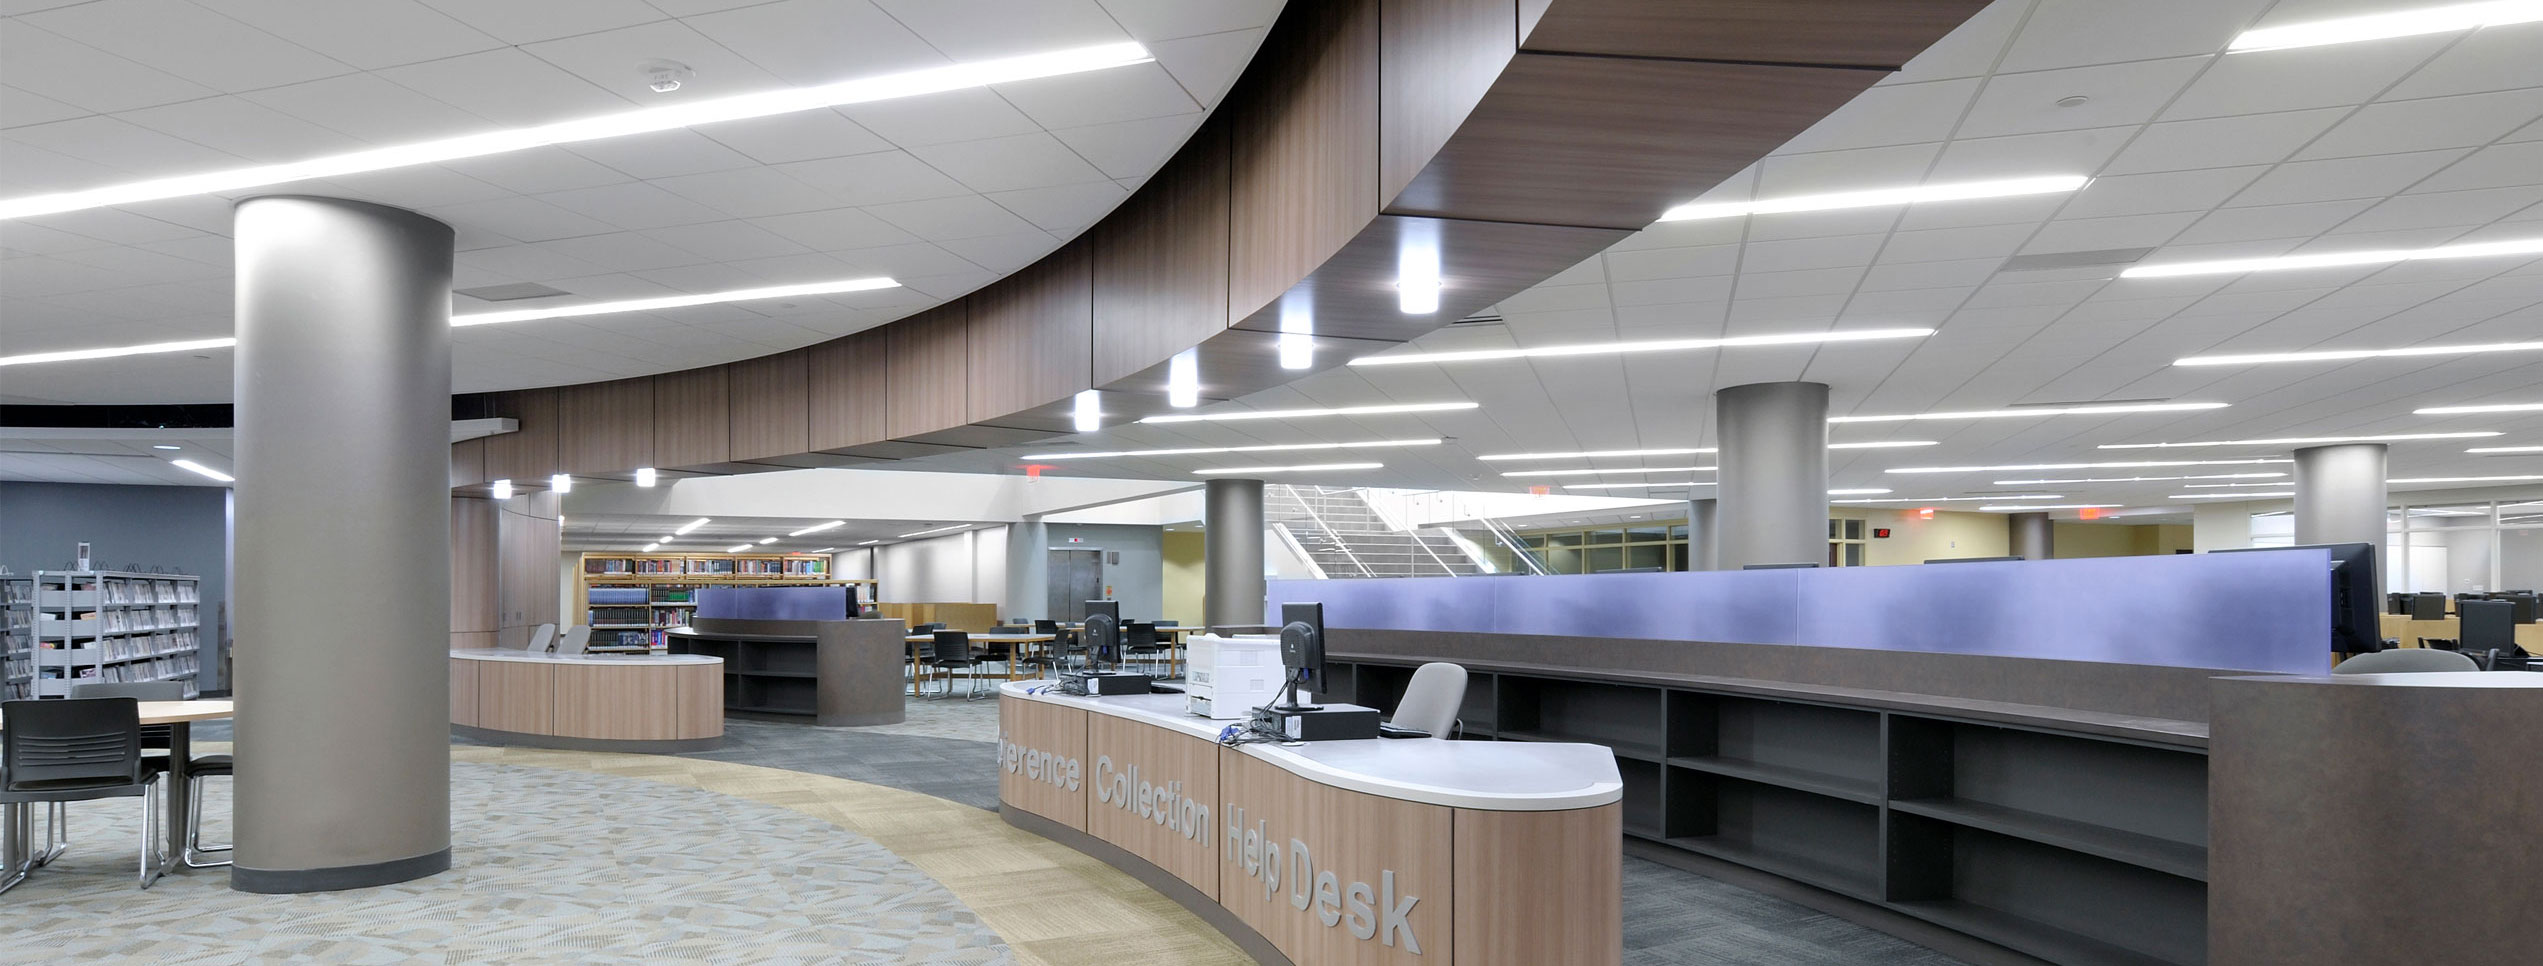 Student Resource Library at Dupage